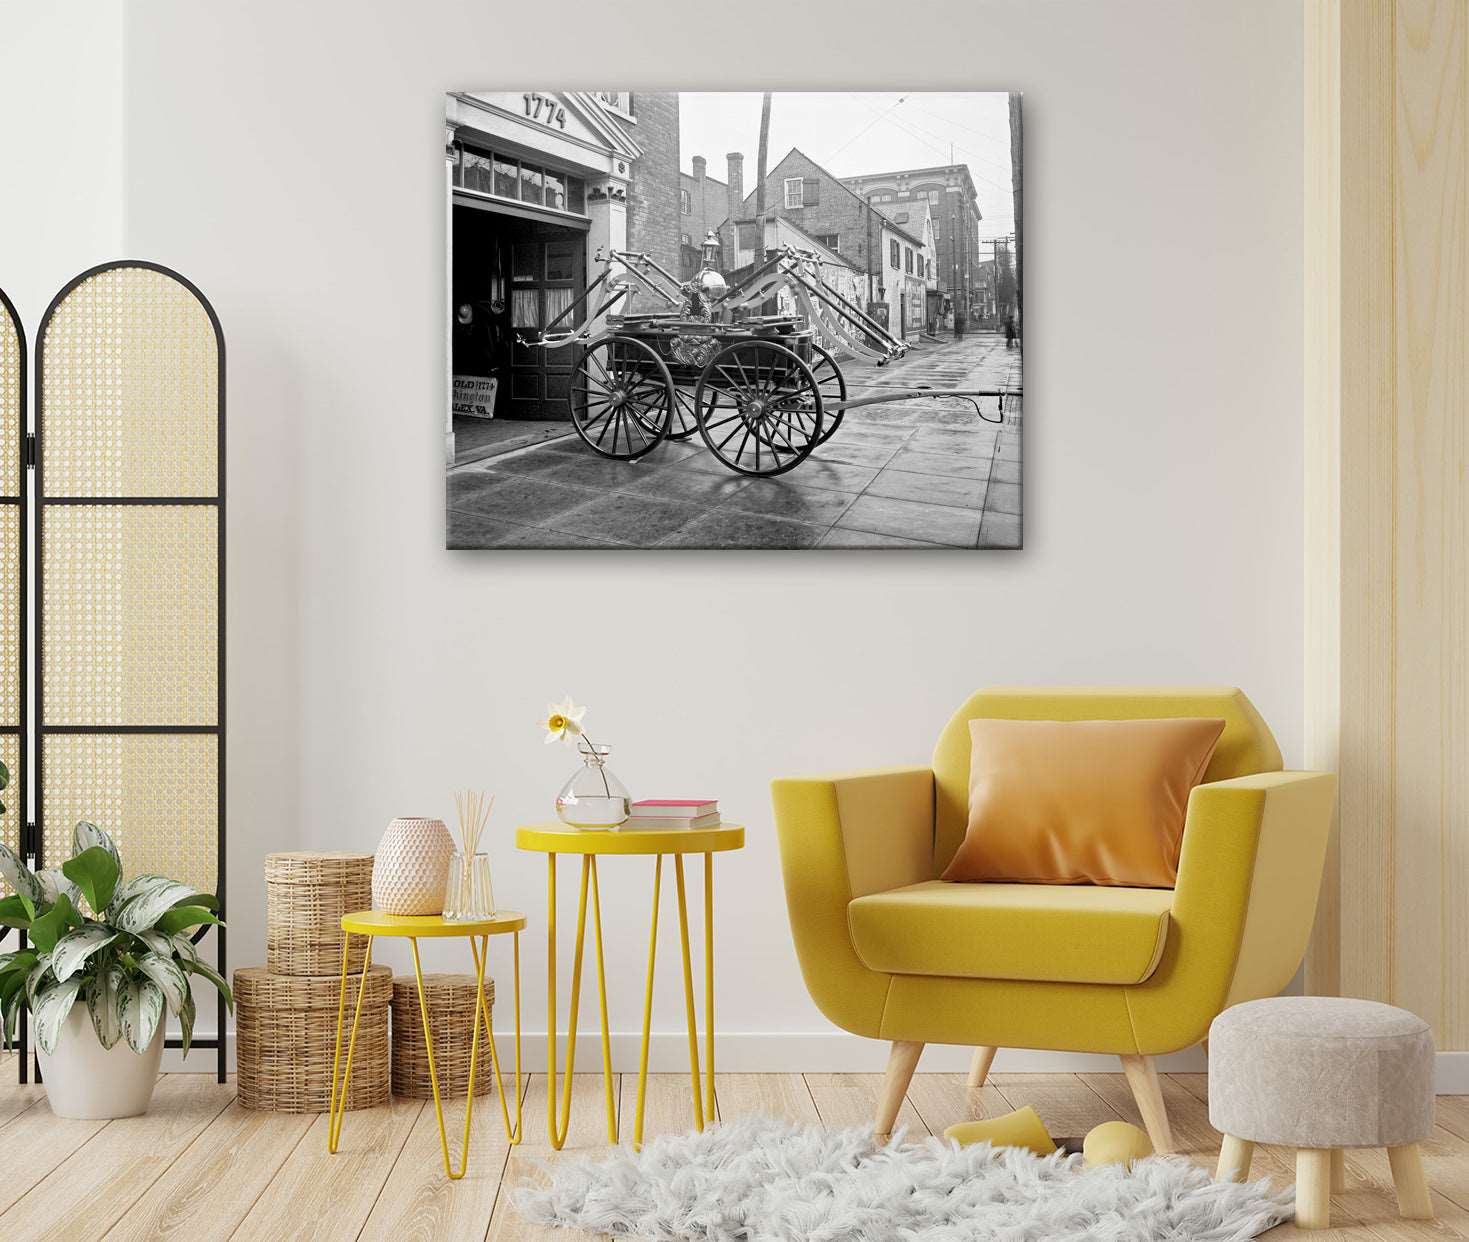 A living room with a canvas print of a vintage photograph of an old fire engine